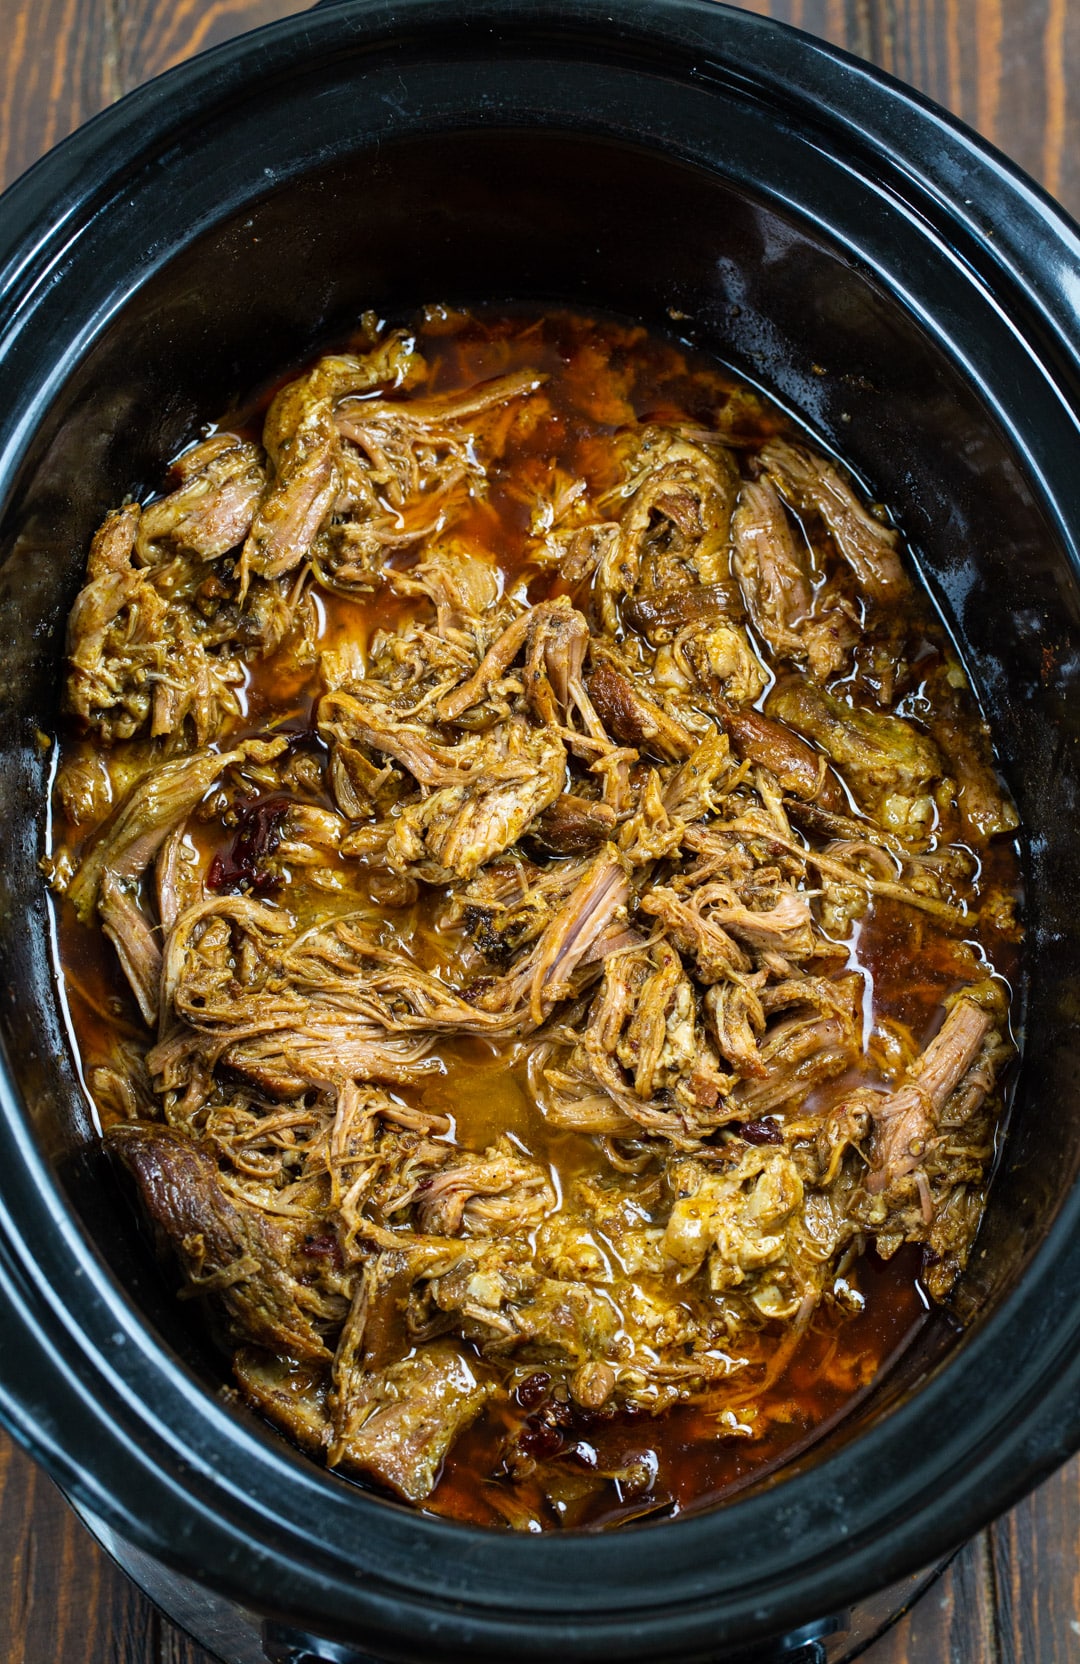 Pulled Pork in a slow cooker.